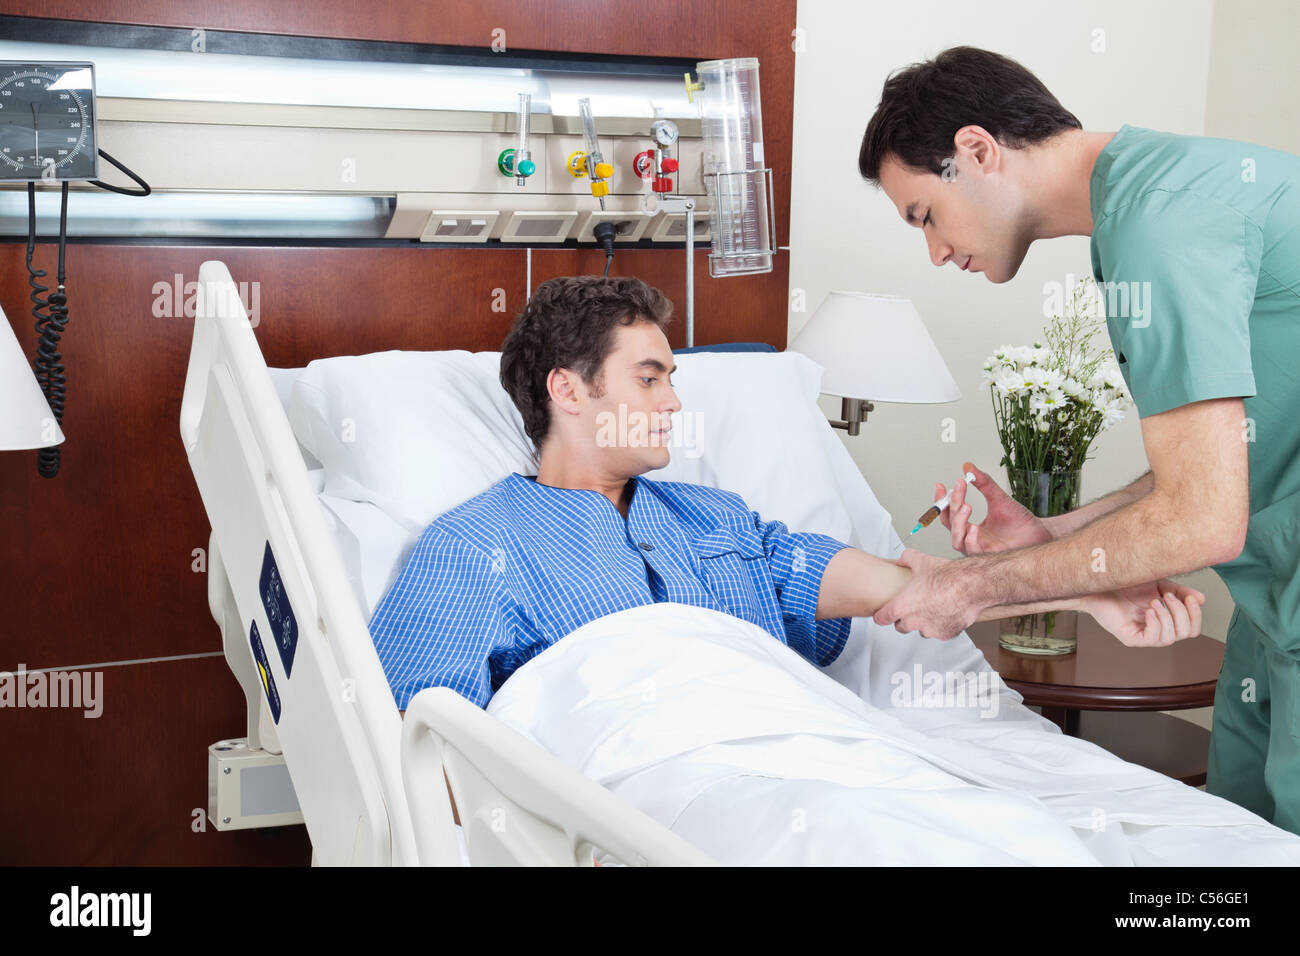 Doctor giving injection to the young patient in hospital Stock Photo